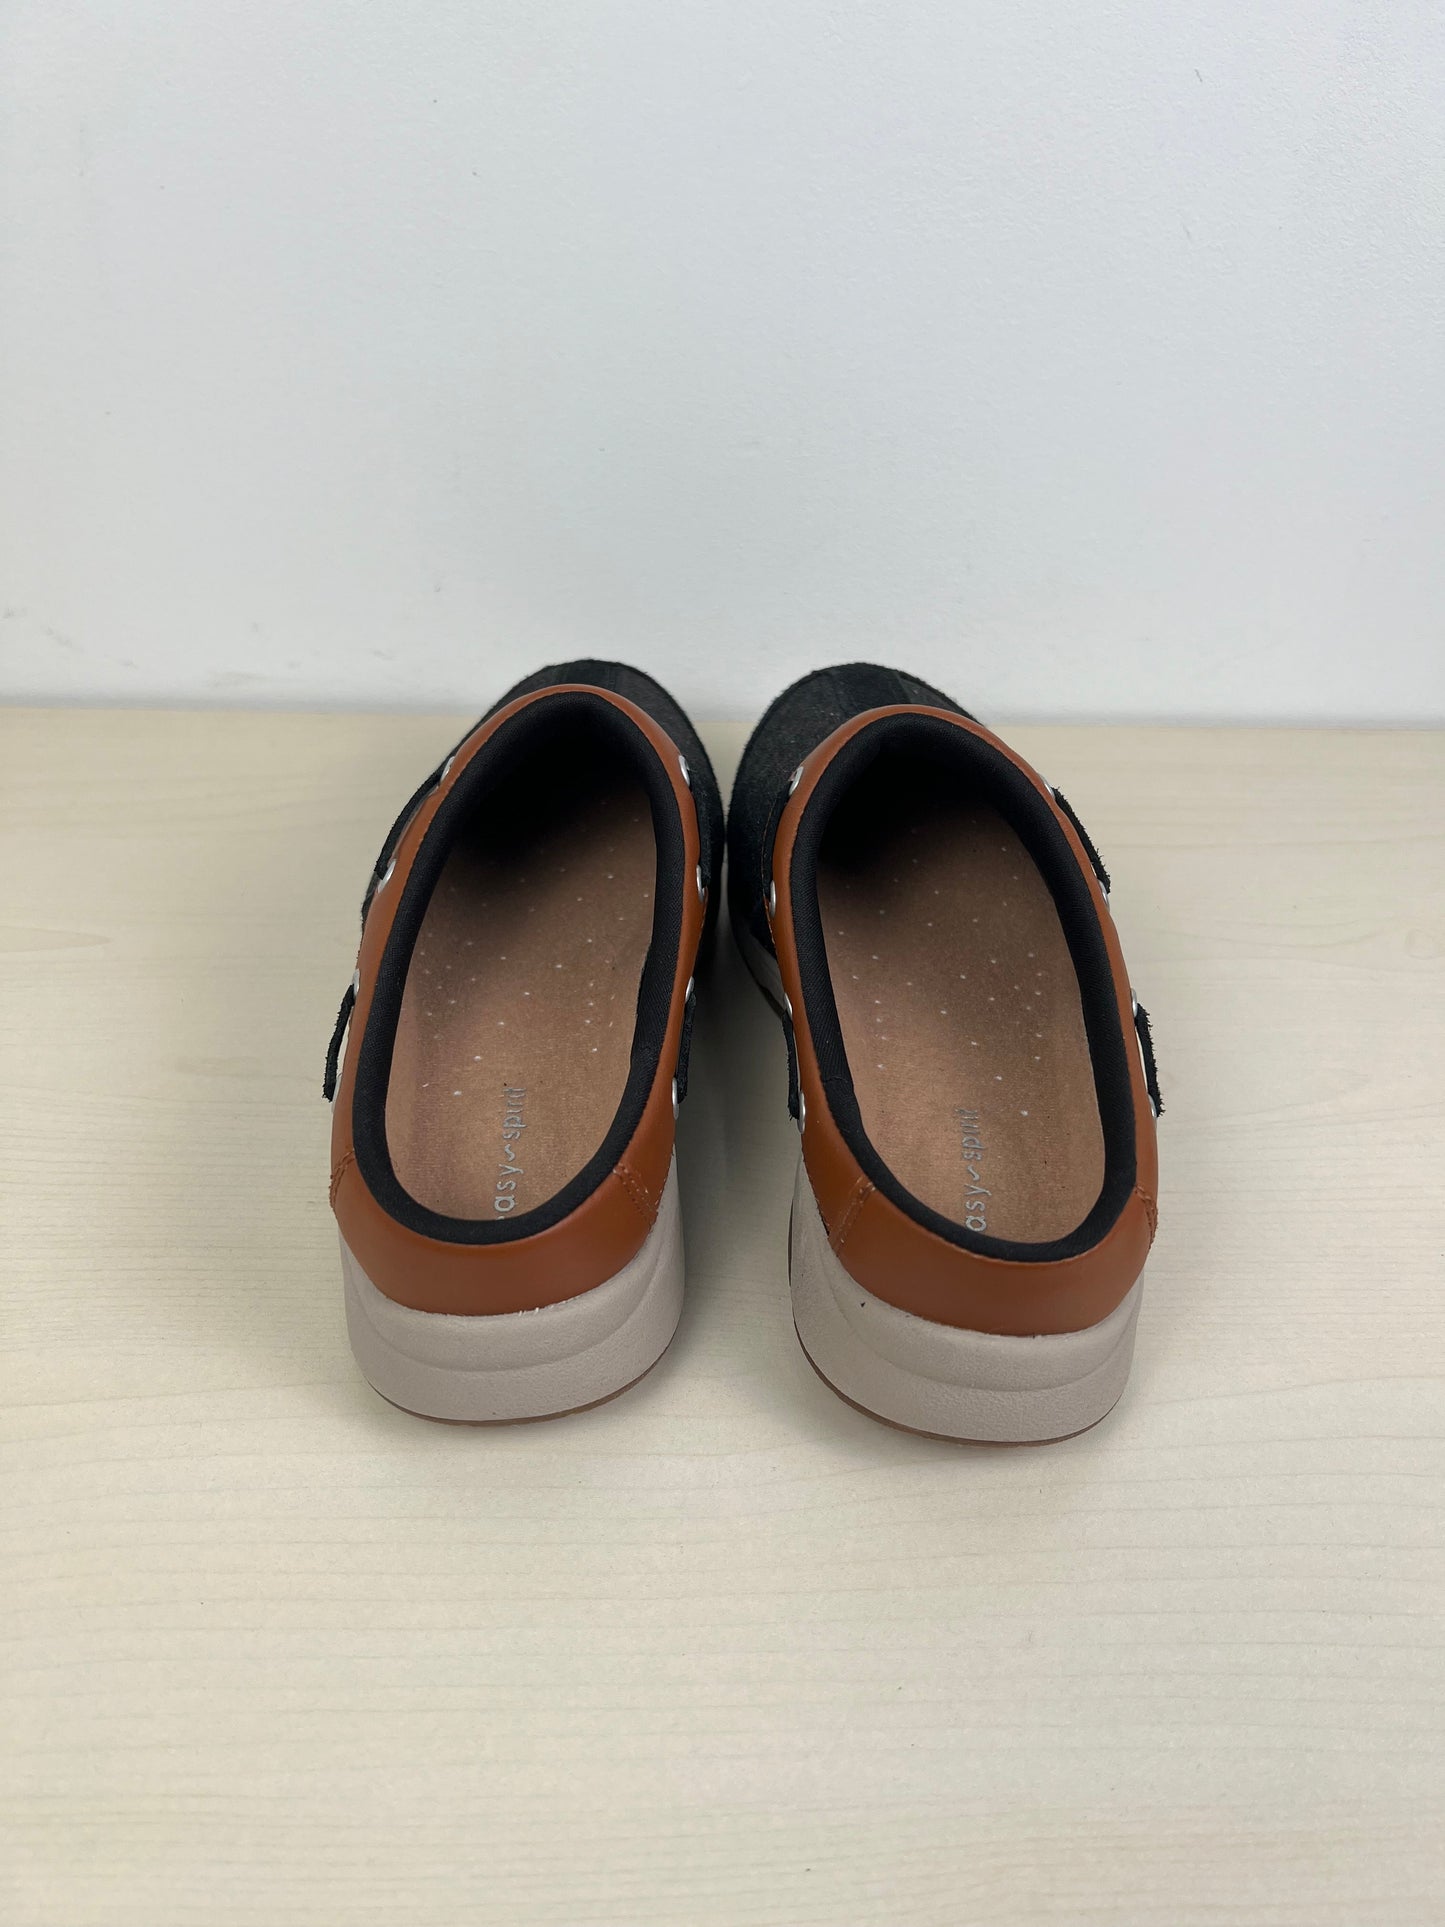 Shoes Sneakers By Easy Spirit  Size: 7.5